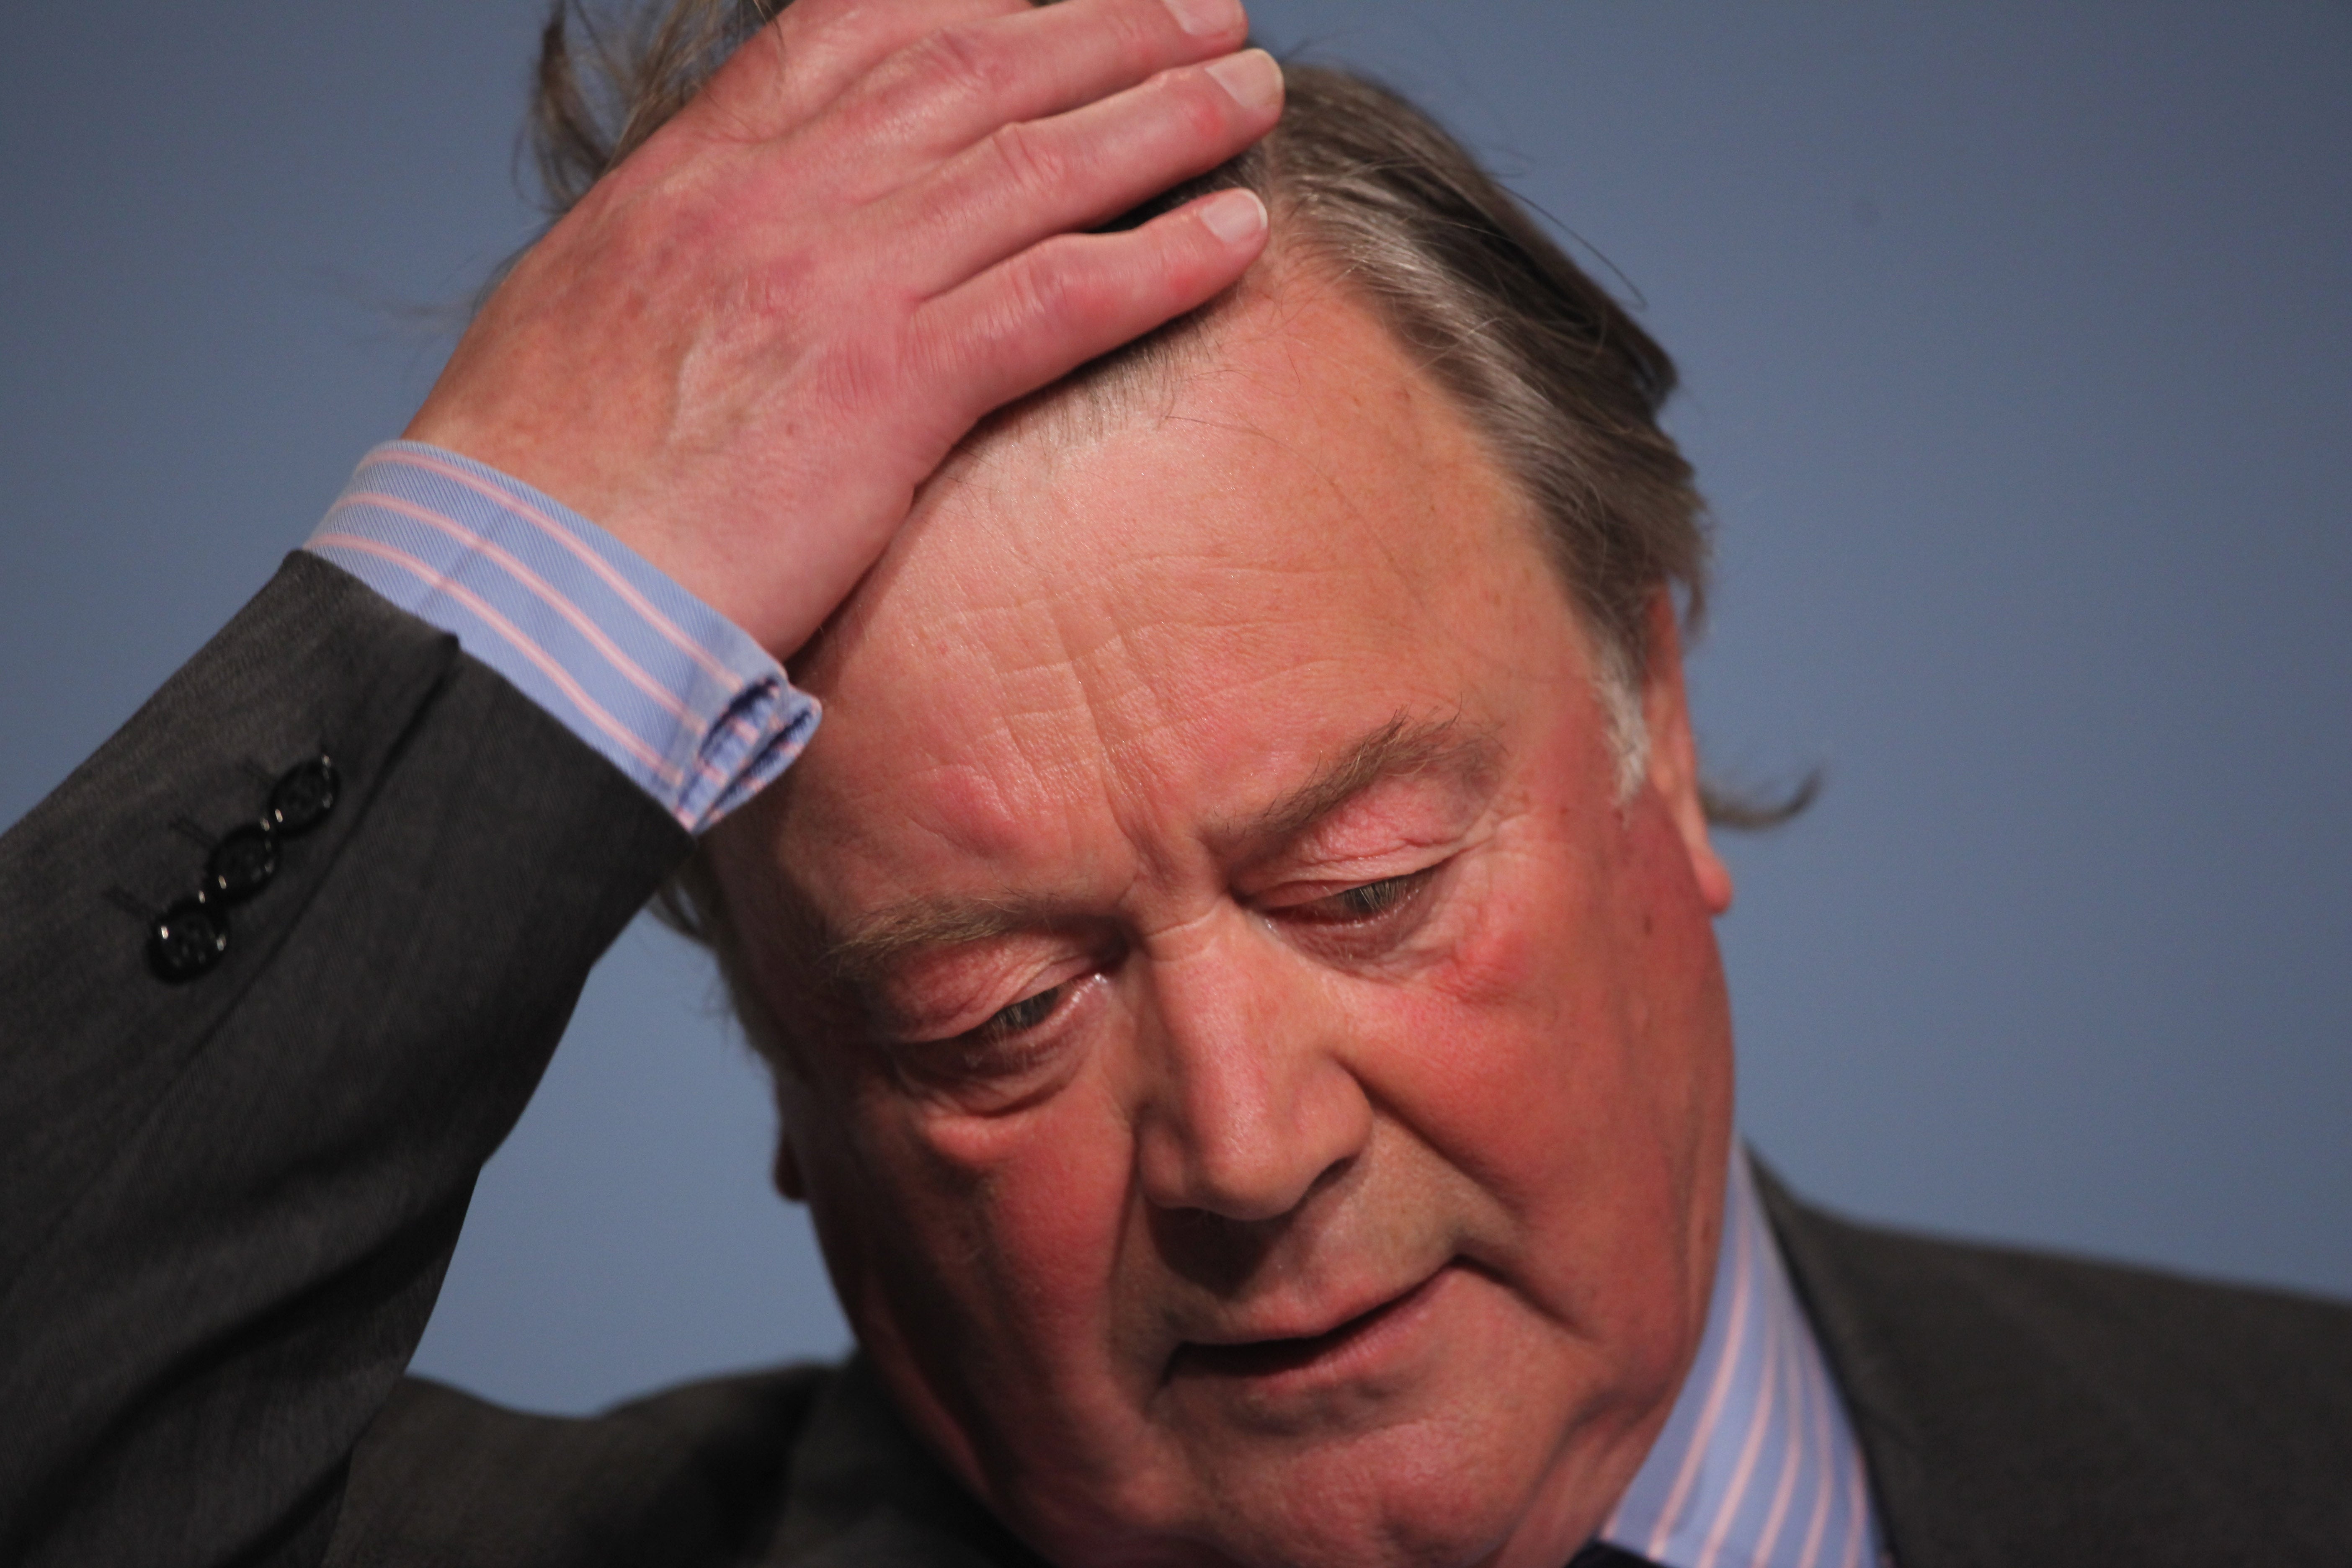 In 2005 Ken Clarke came fourth and last at the third time of trying